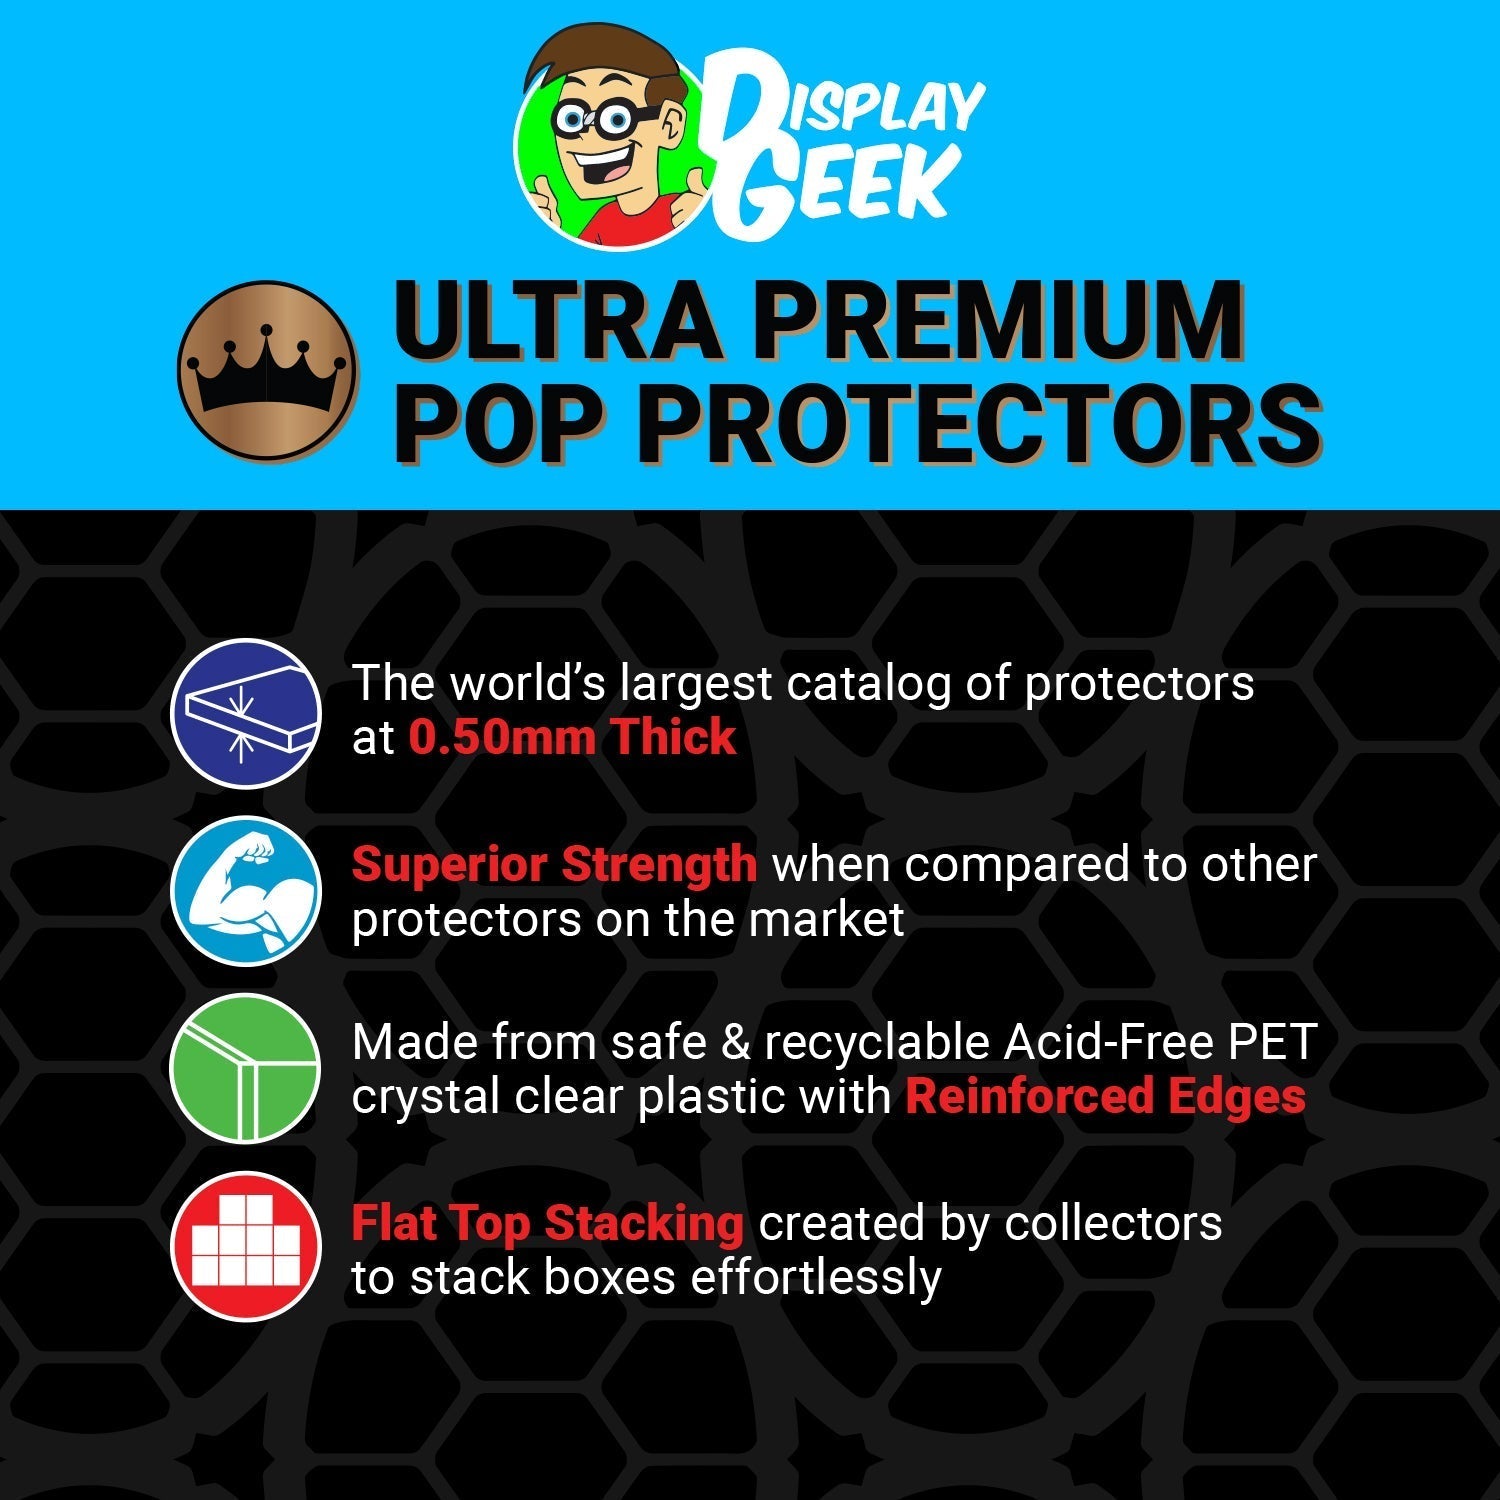 Pop Protector for 9 inch Giant Freddy Funko Black & White SDCC Funko Pop - PPG Pop Protector Guide Search Created by Display Geek